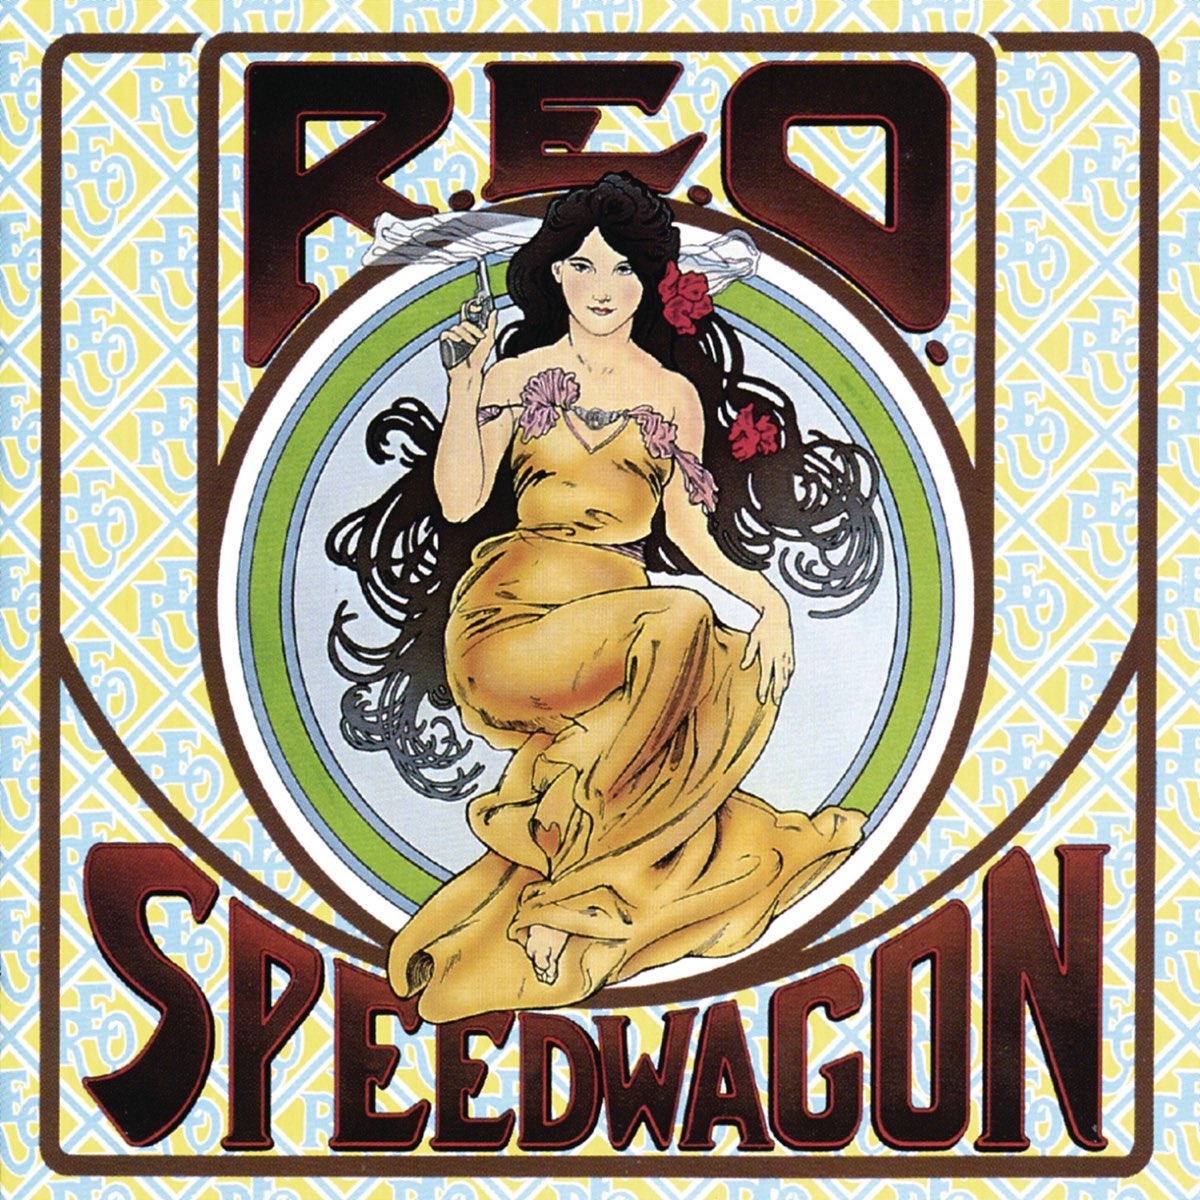 ‎this Time We Mean It By Reo Speedwagon On Apple Music